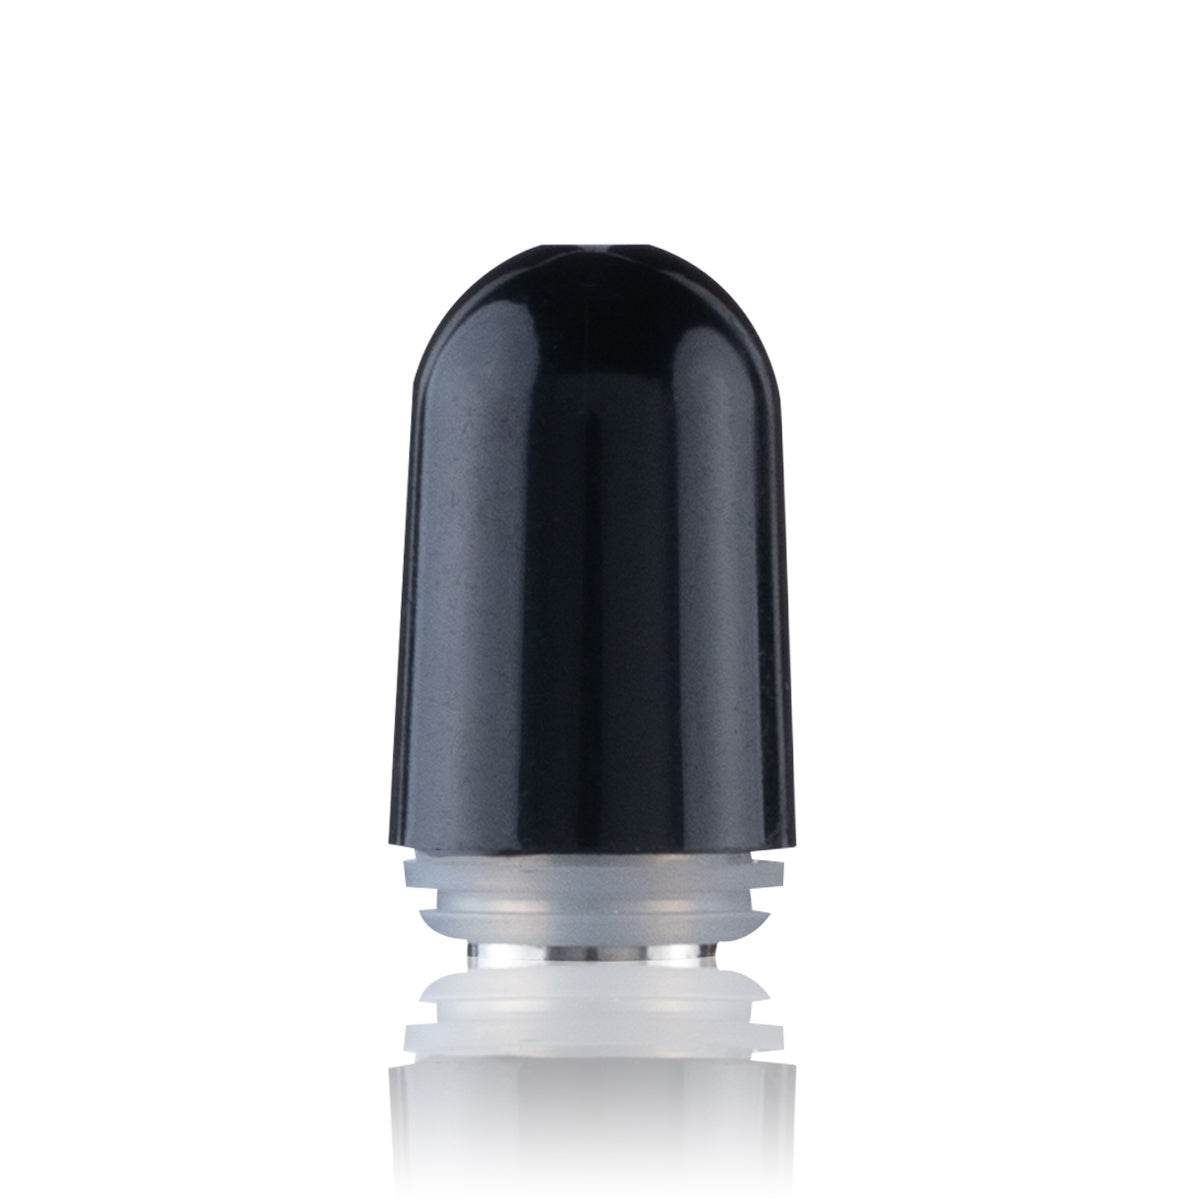 Mouth Tip | Rounded Mouth Tip for Vapes | Ceramic - Black - 100 Count Mouth Tips Biohazard Inc   